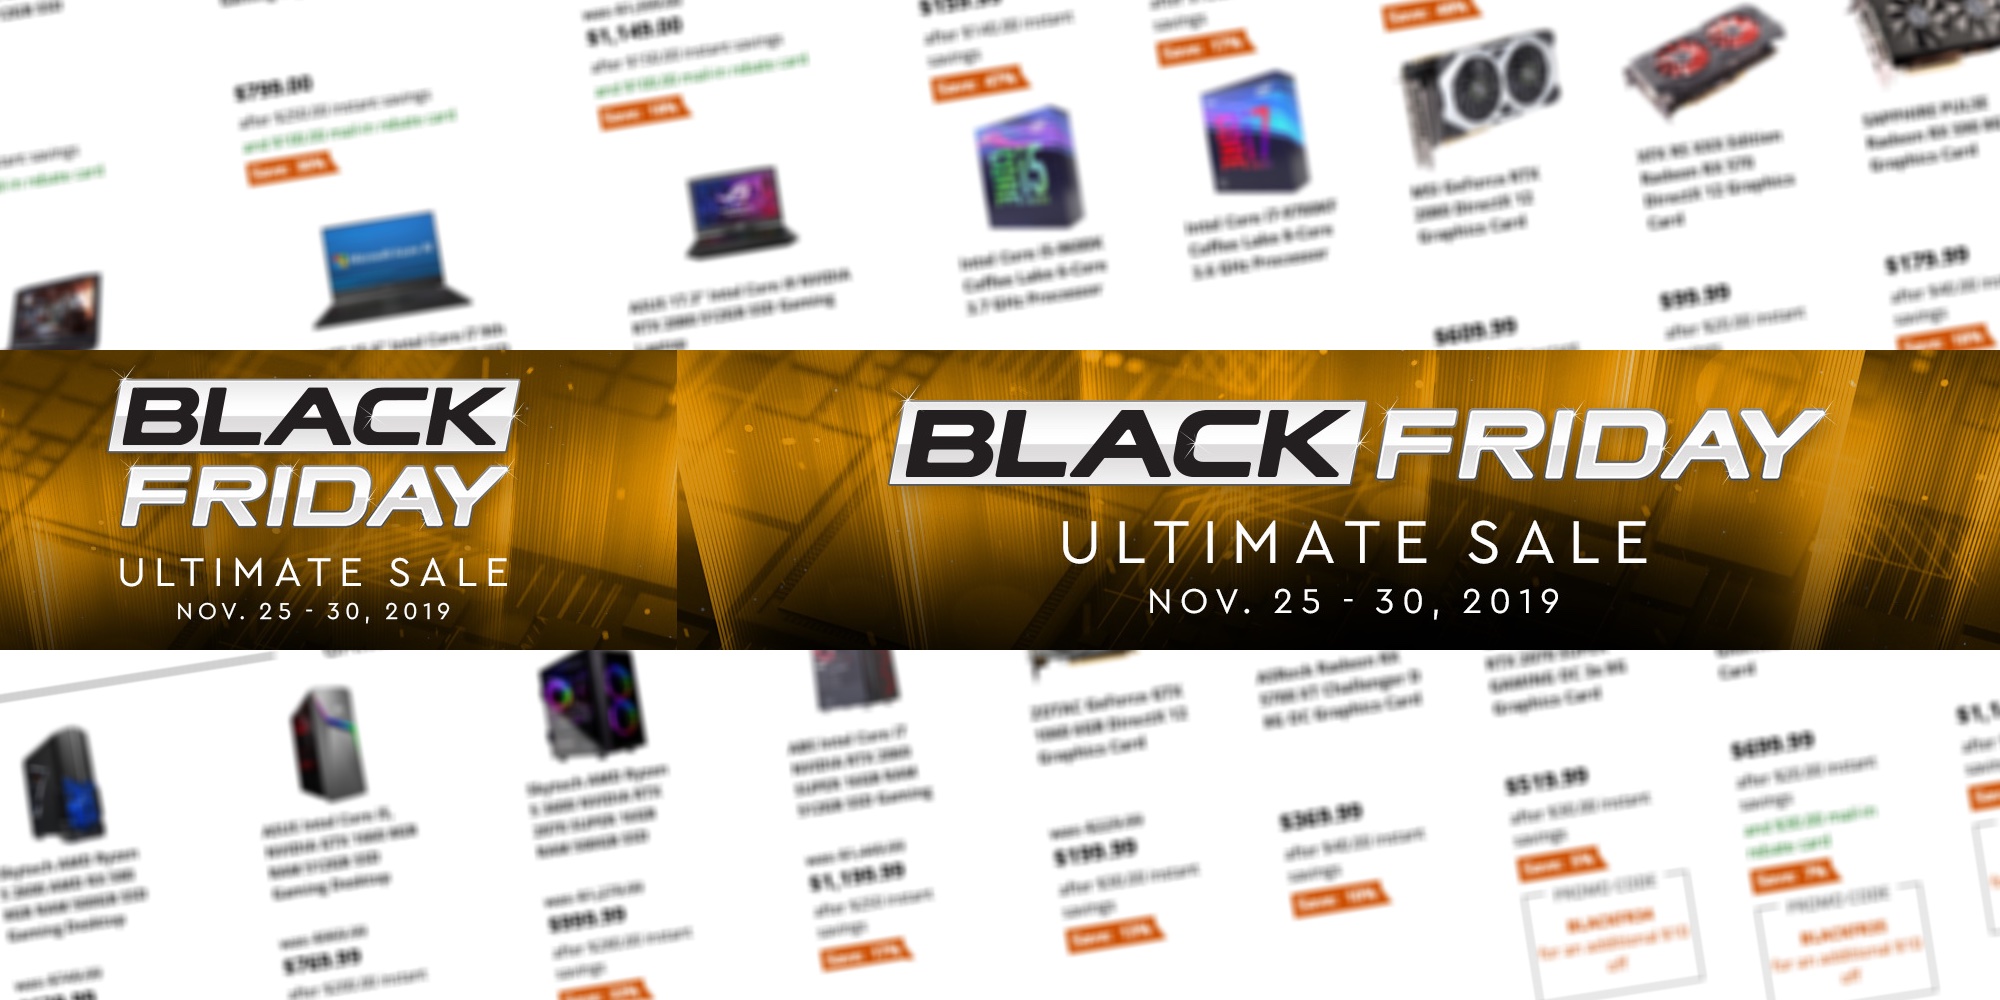 Newegg Black Friday Ad 2019 Delivers Deals On Pc Gear More 9to5toys